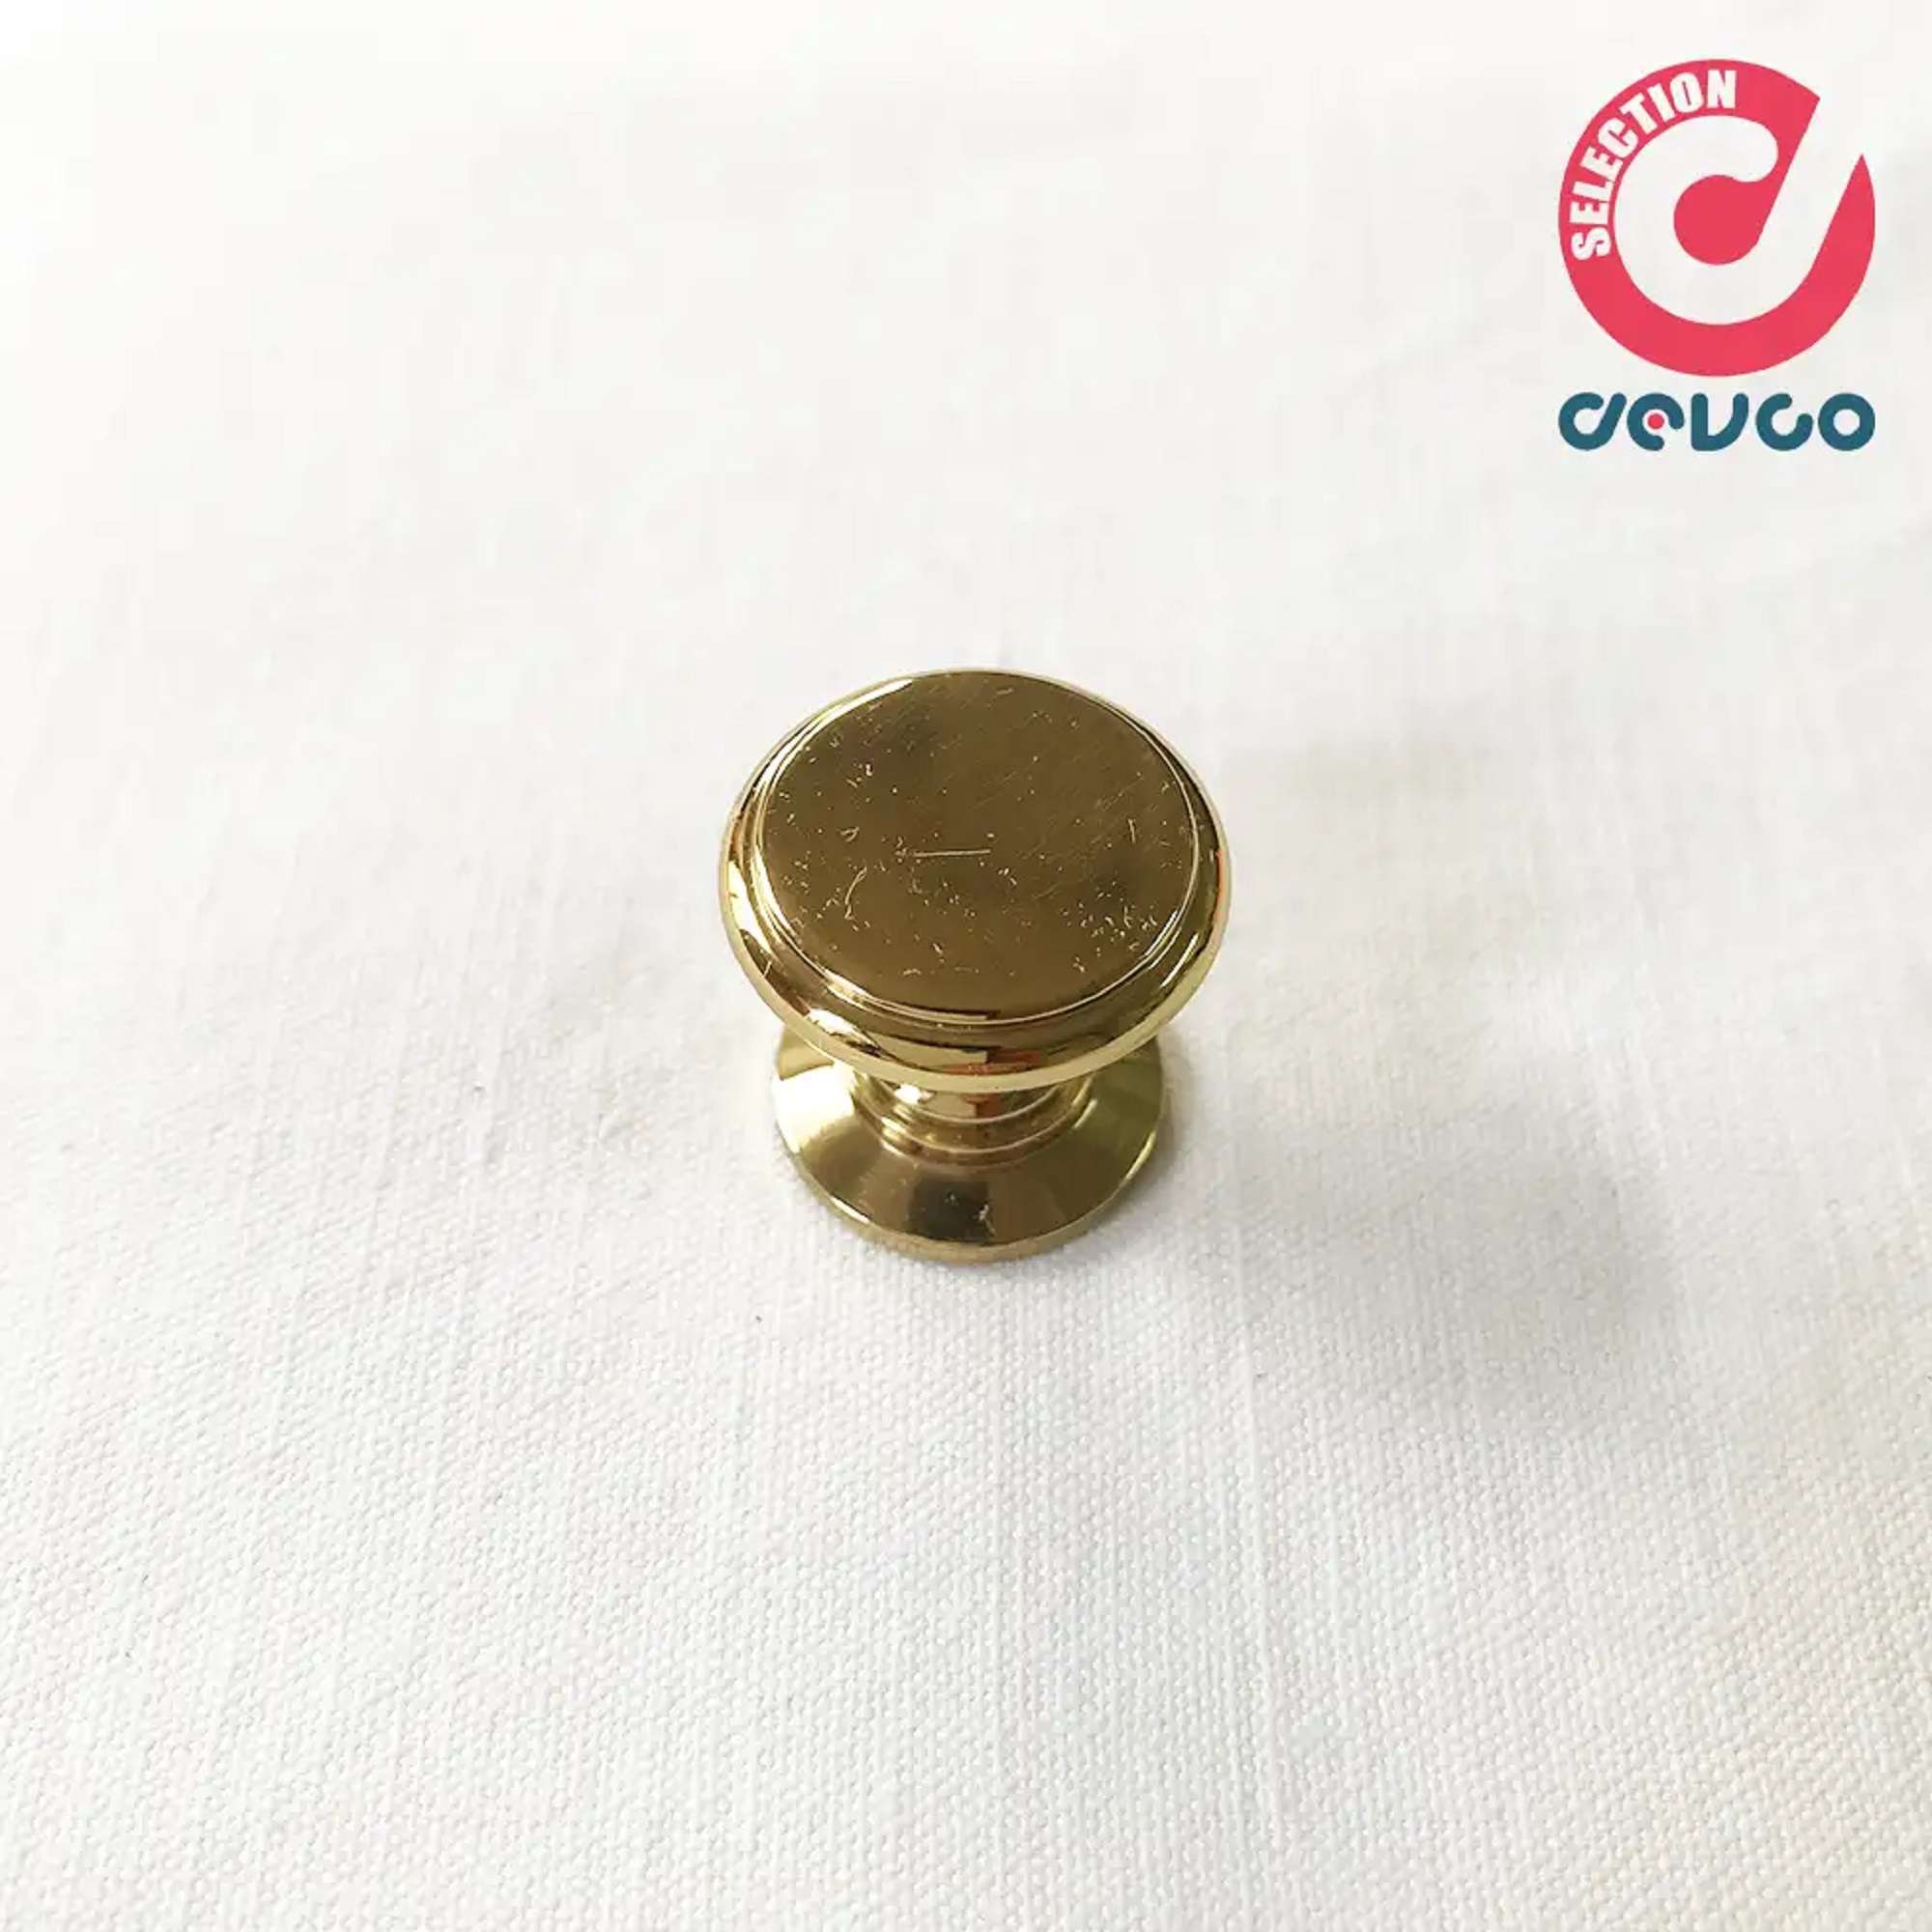 Knob size 30 gold color with pins and nuts  Omp Porro  0165 - 30